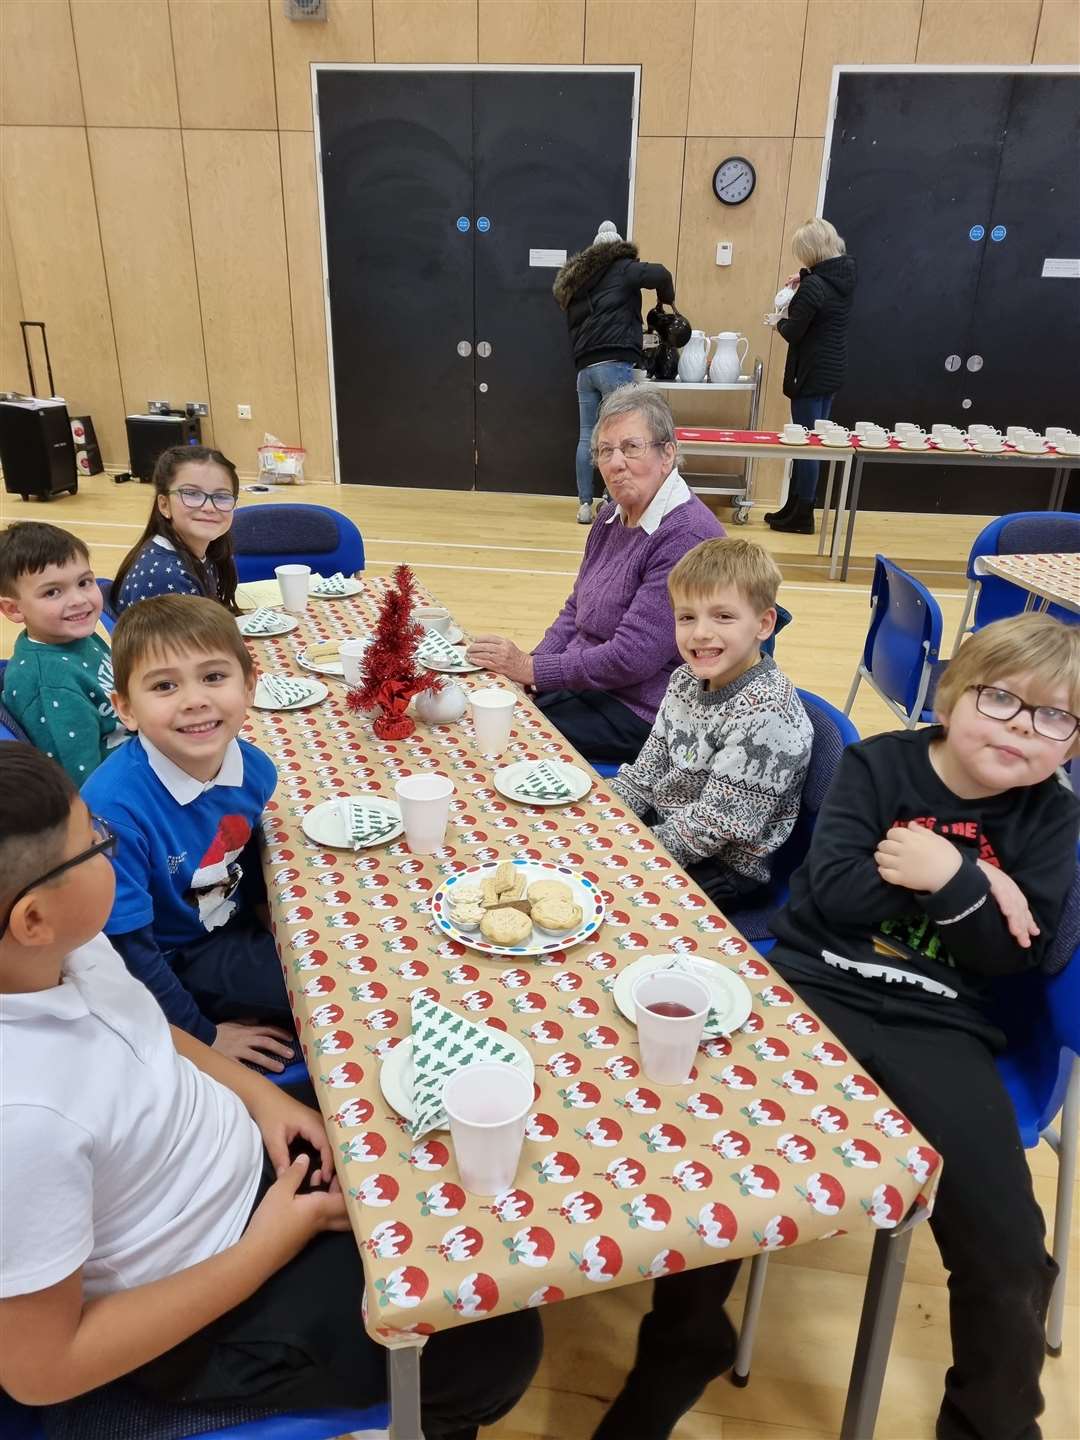 Mincemeat pies were on the menu at Noss Primary School.